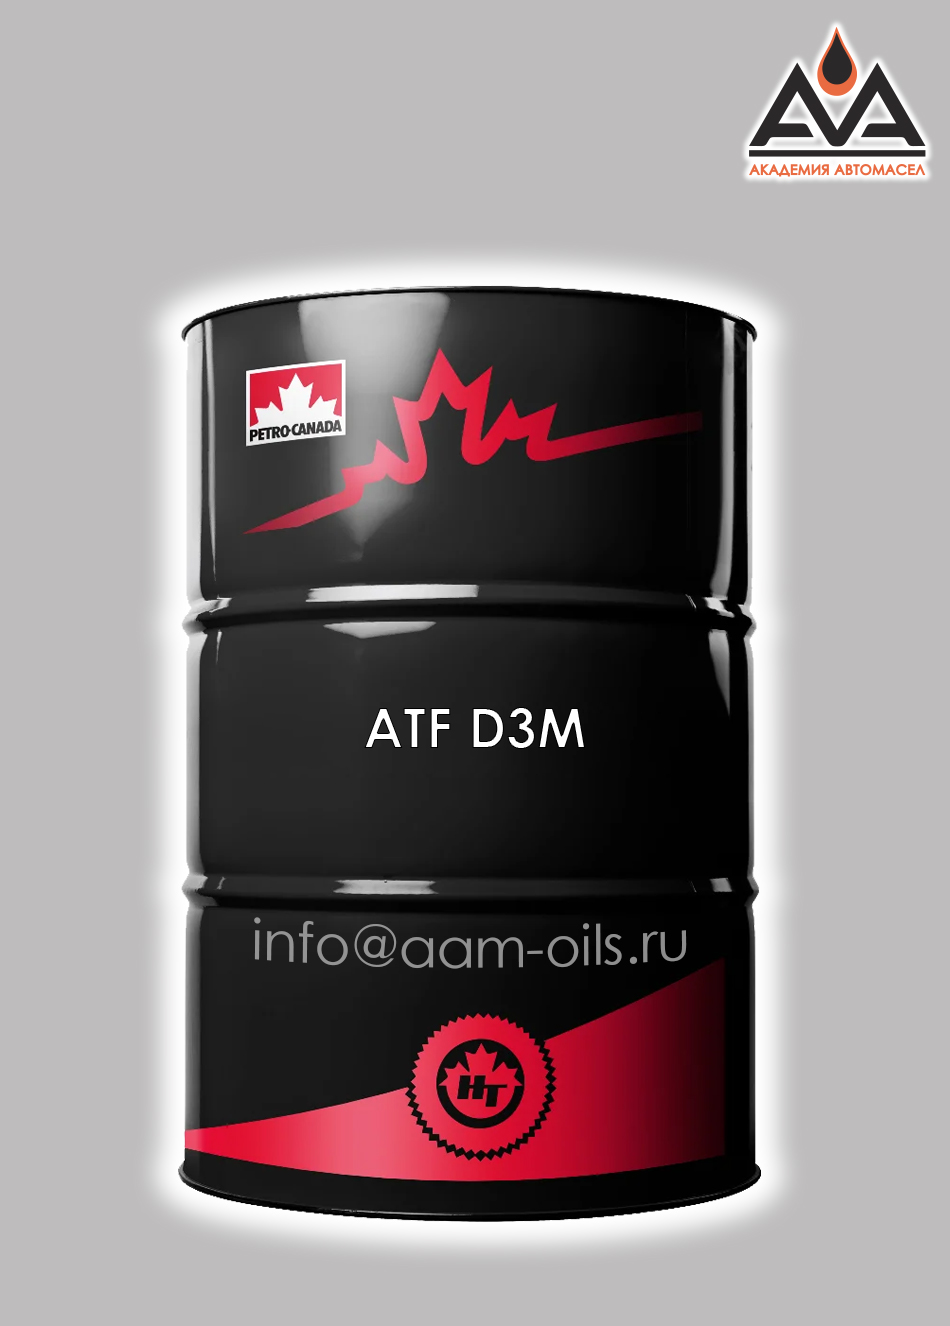 Petro canada atf. Масло Petro Canada ATF d3m. Petro-Canada 10w30 205л. Масло Петро Канада 10w30 SHP Duron. ATF d3m аналоги.